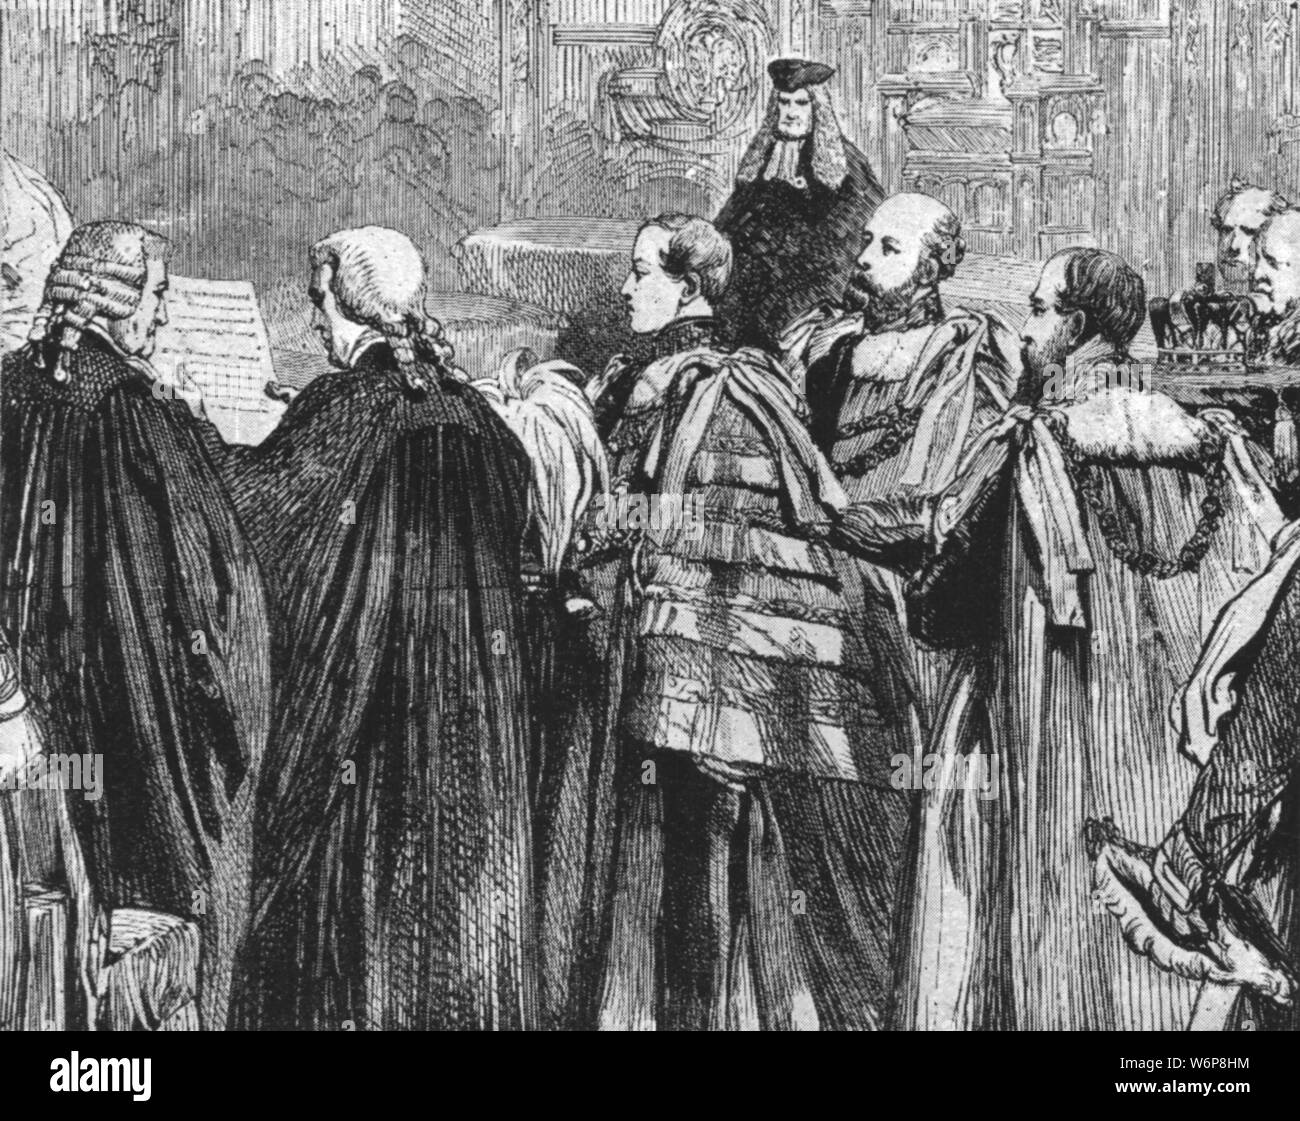 'The Prince of Wales taking his seat for the first time in the House of Lords as a Peer of the Realm, February 5, 1863', (1901). Prince Albert Edward (1841-1910), the future King Edward VII, at the Palace of Westminster in London. From &quot;The Illustrated London News Record of the Glorious Reign of Queen Victoria 1837-1901: The Life and Accession of King Edward VII. and the Life of Queen Alexandra&quot;. [London, 1901] Stock Photo